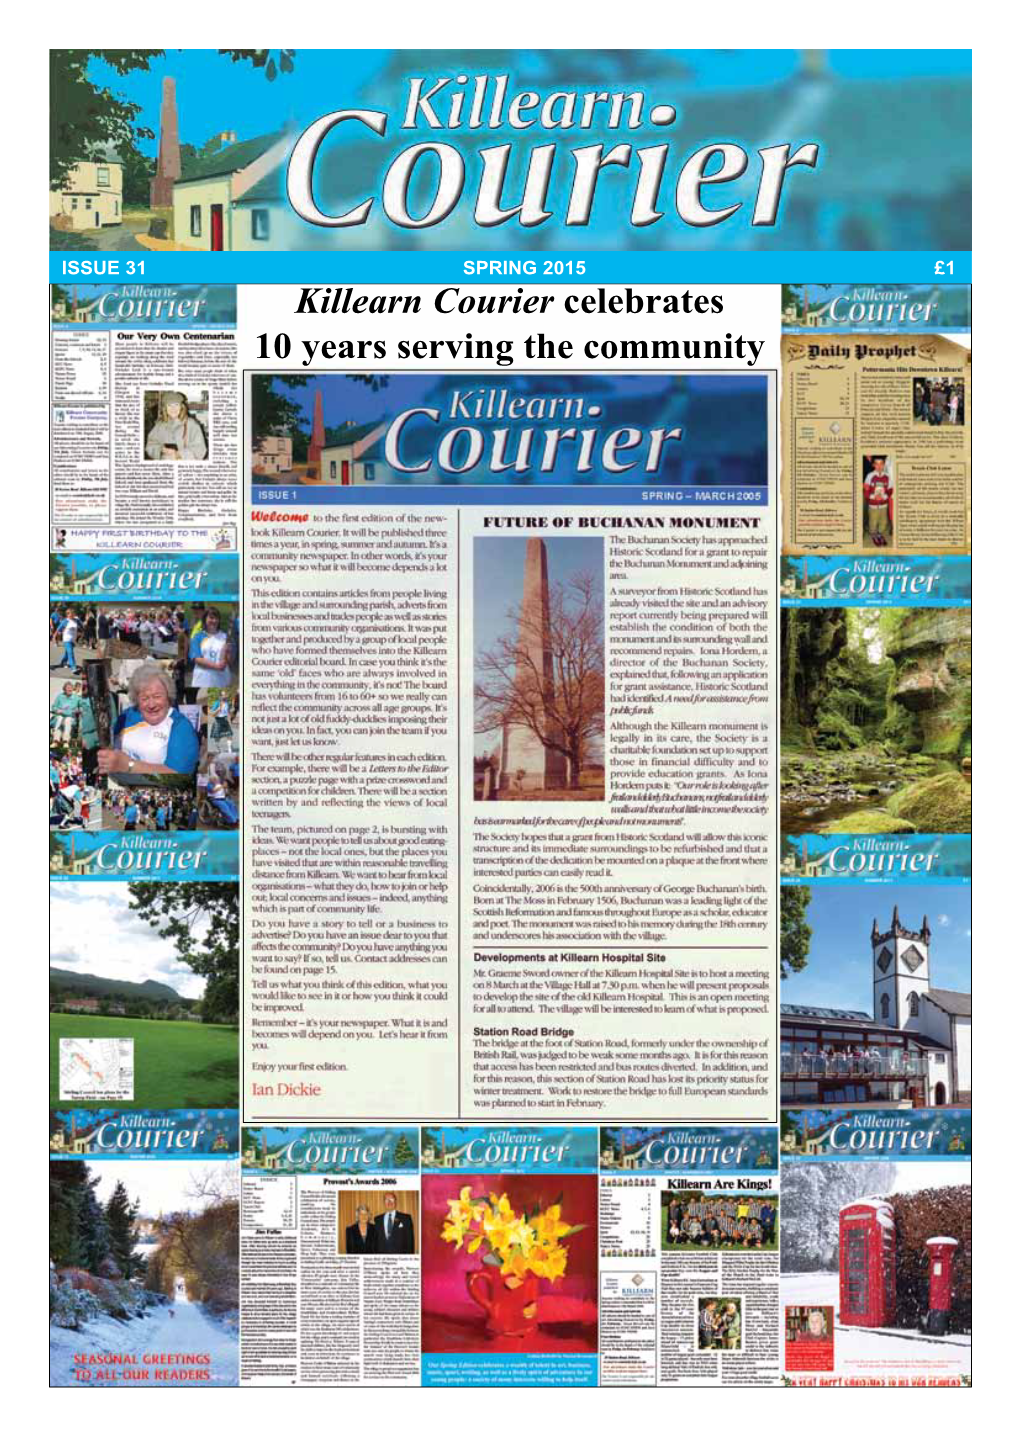 Killearn Courier Celebrates 10 Years Serving the Community Settled at Long Last! LETTERS to the EDITOR We Welcome Your Letters and Emails